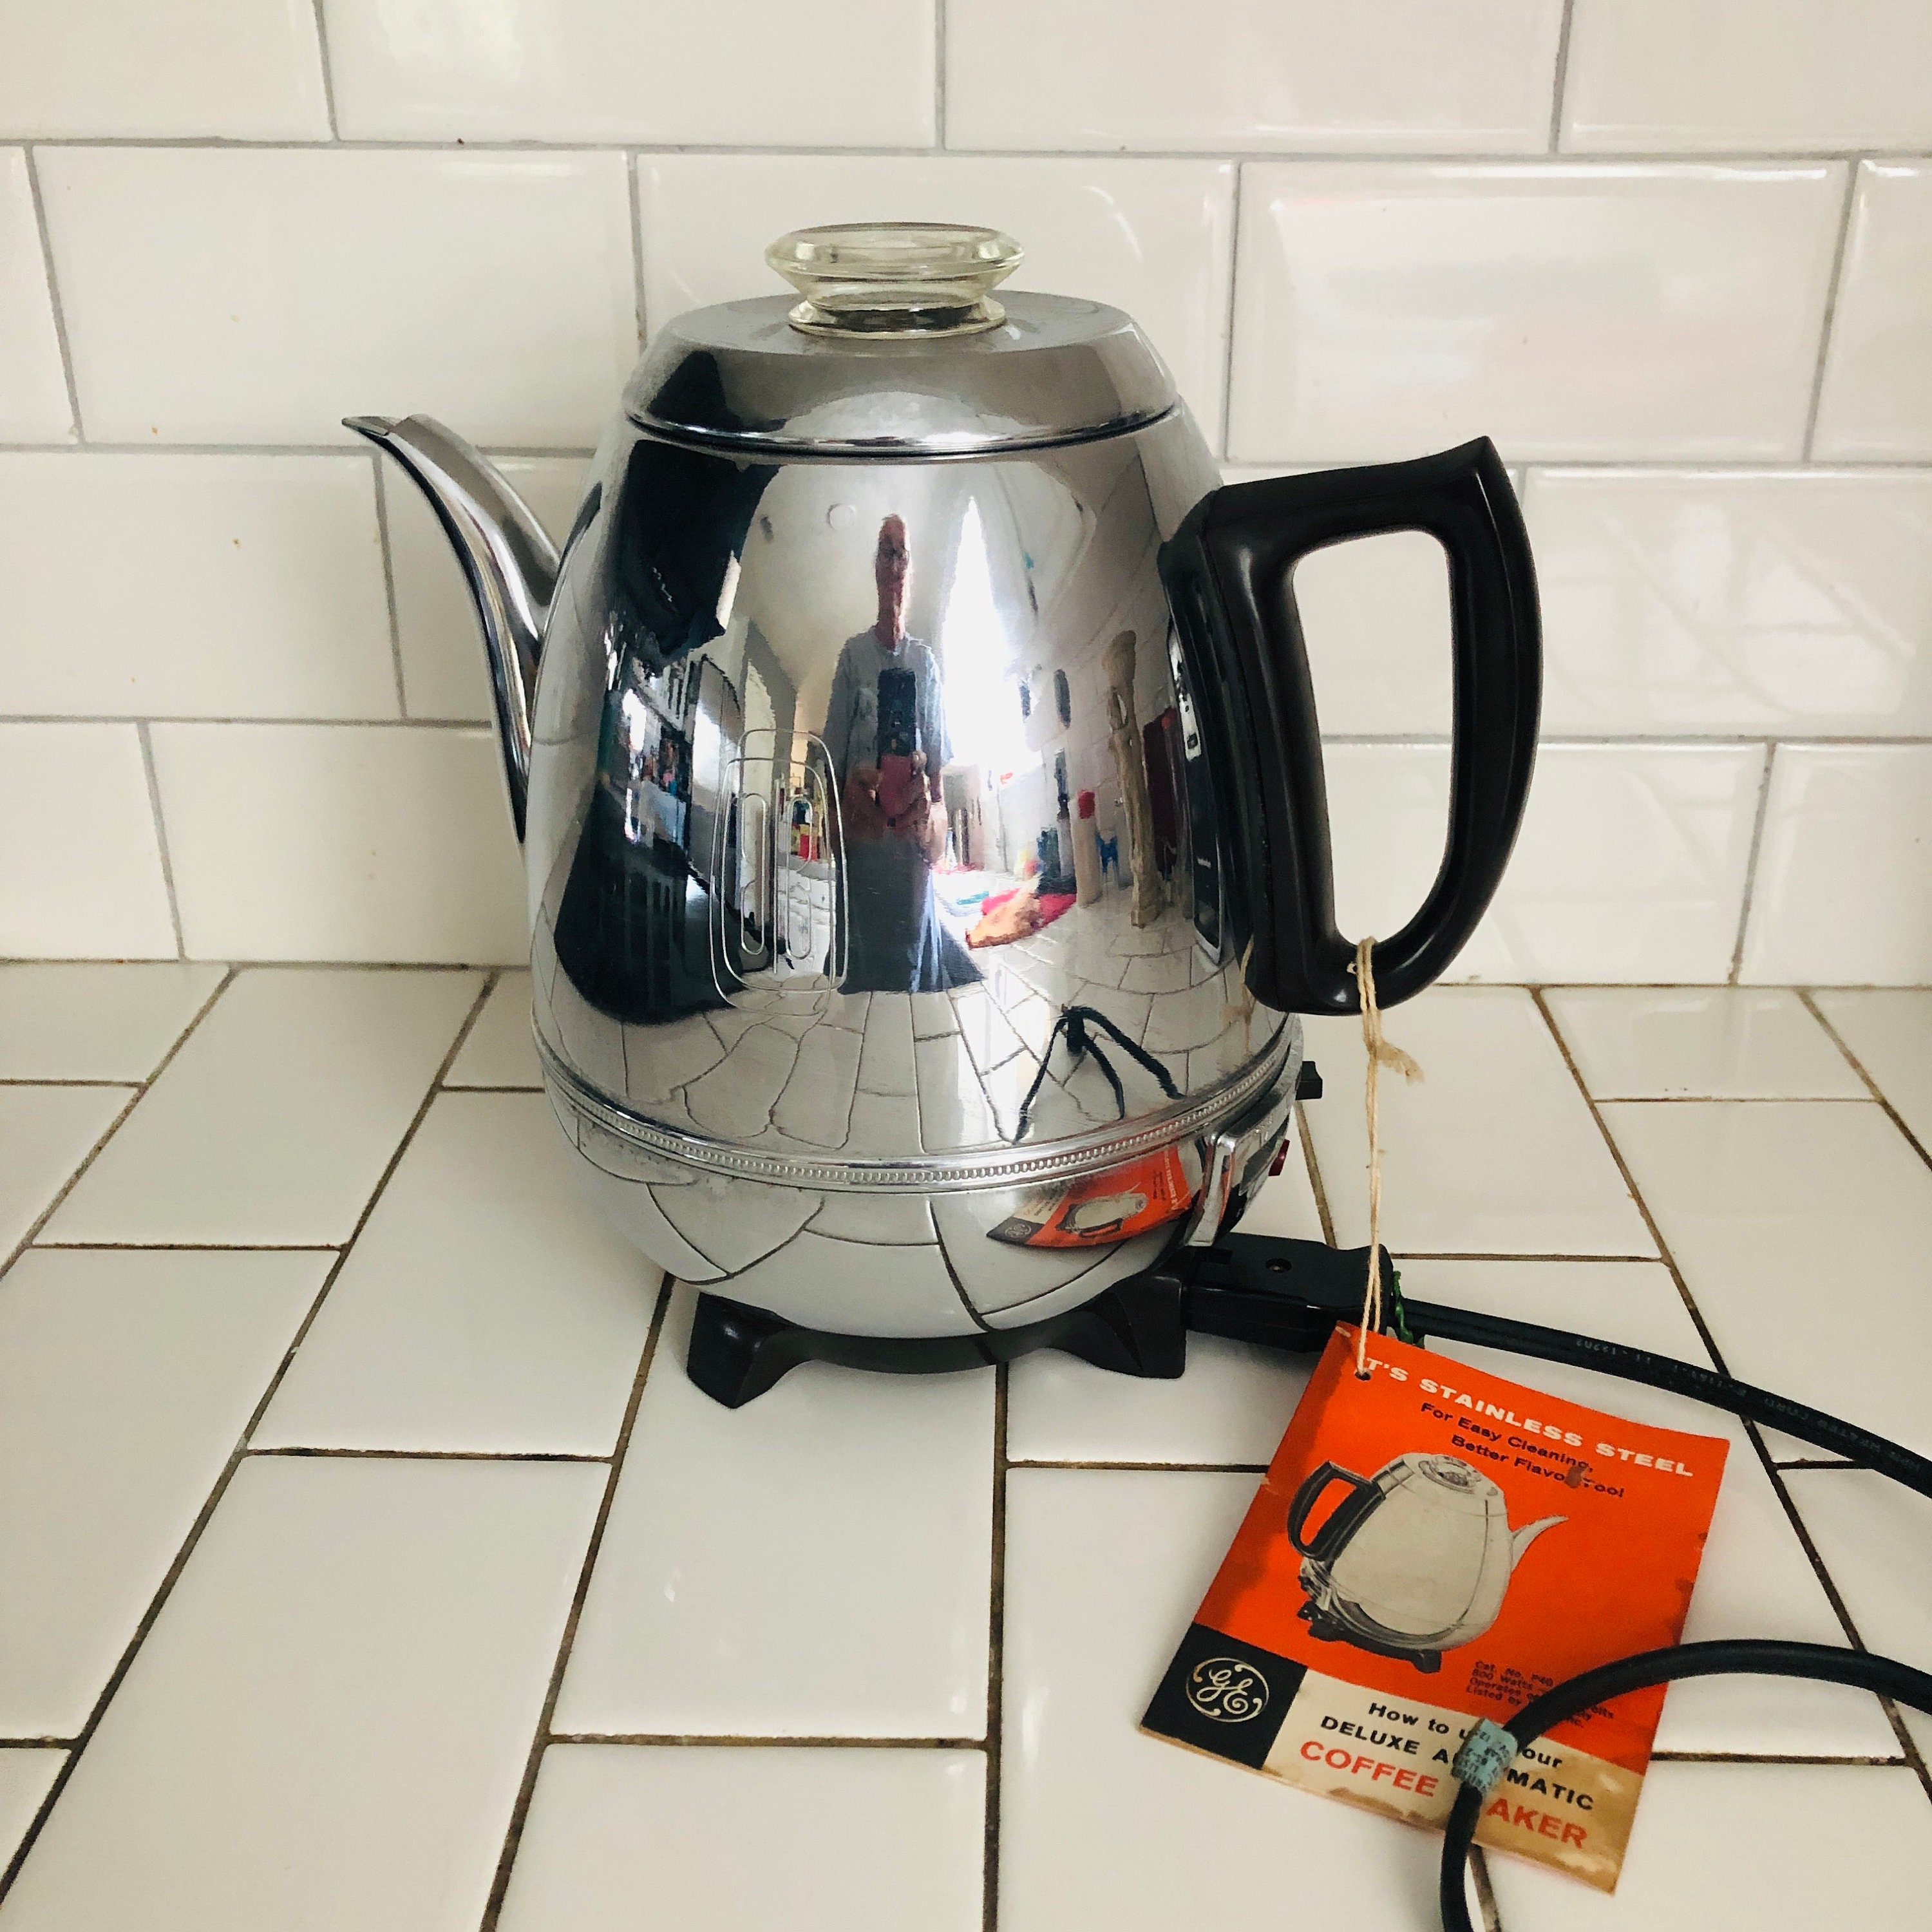 OLD Vintage Automatic Percolator General Electric GE Coffee Maker REVIEW  and How To Use 94P15 